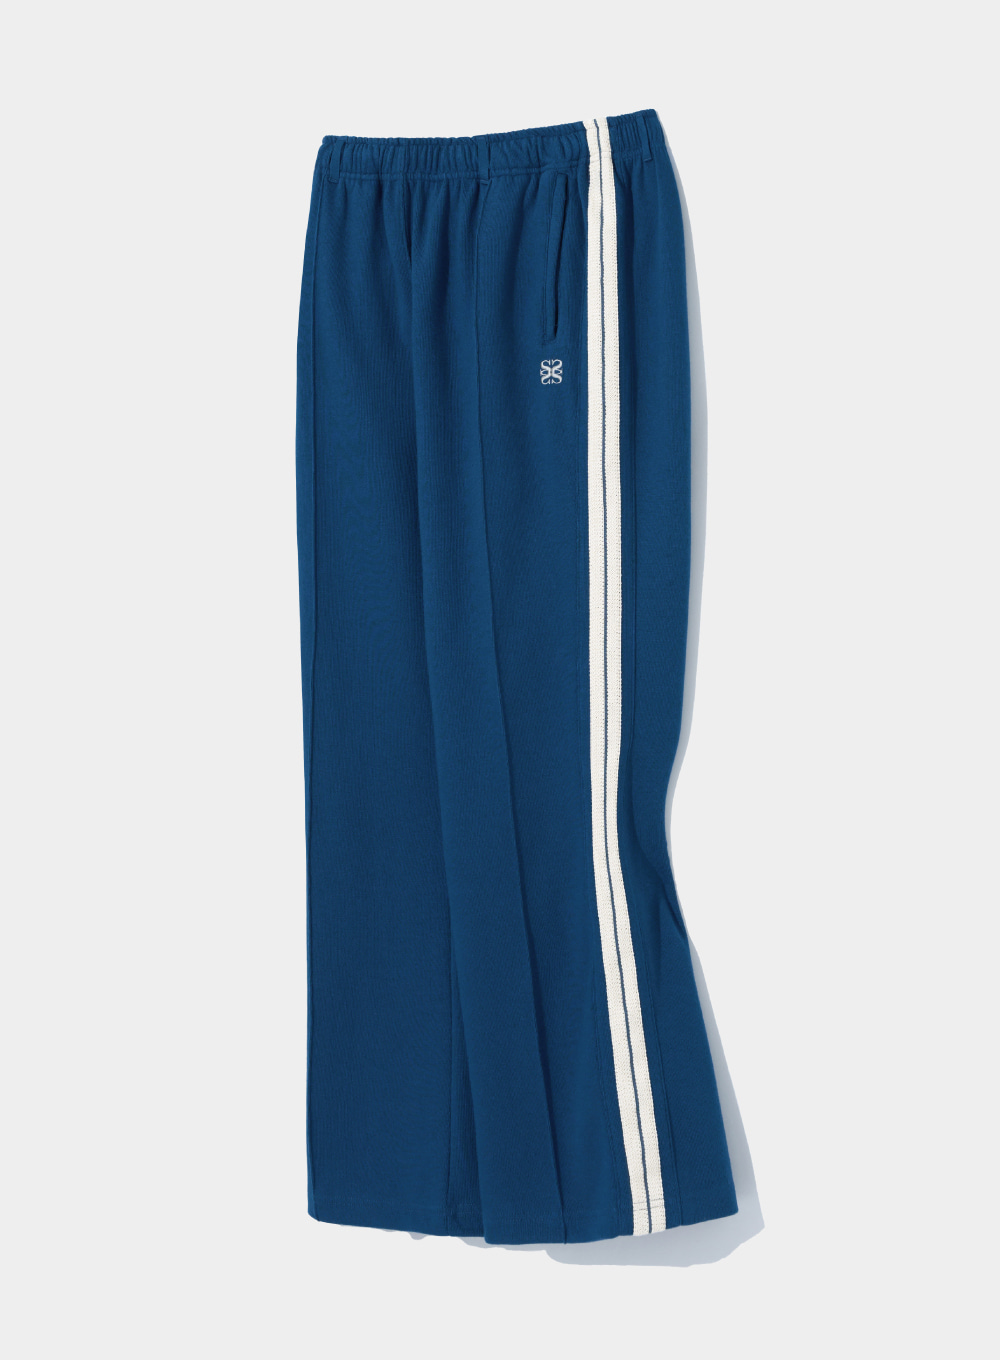 (W) Lawton All Day Track Pants - Resort Blue